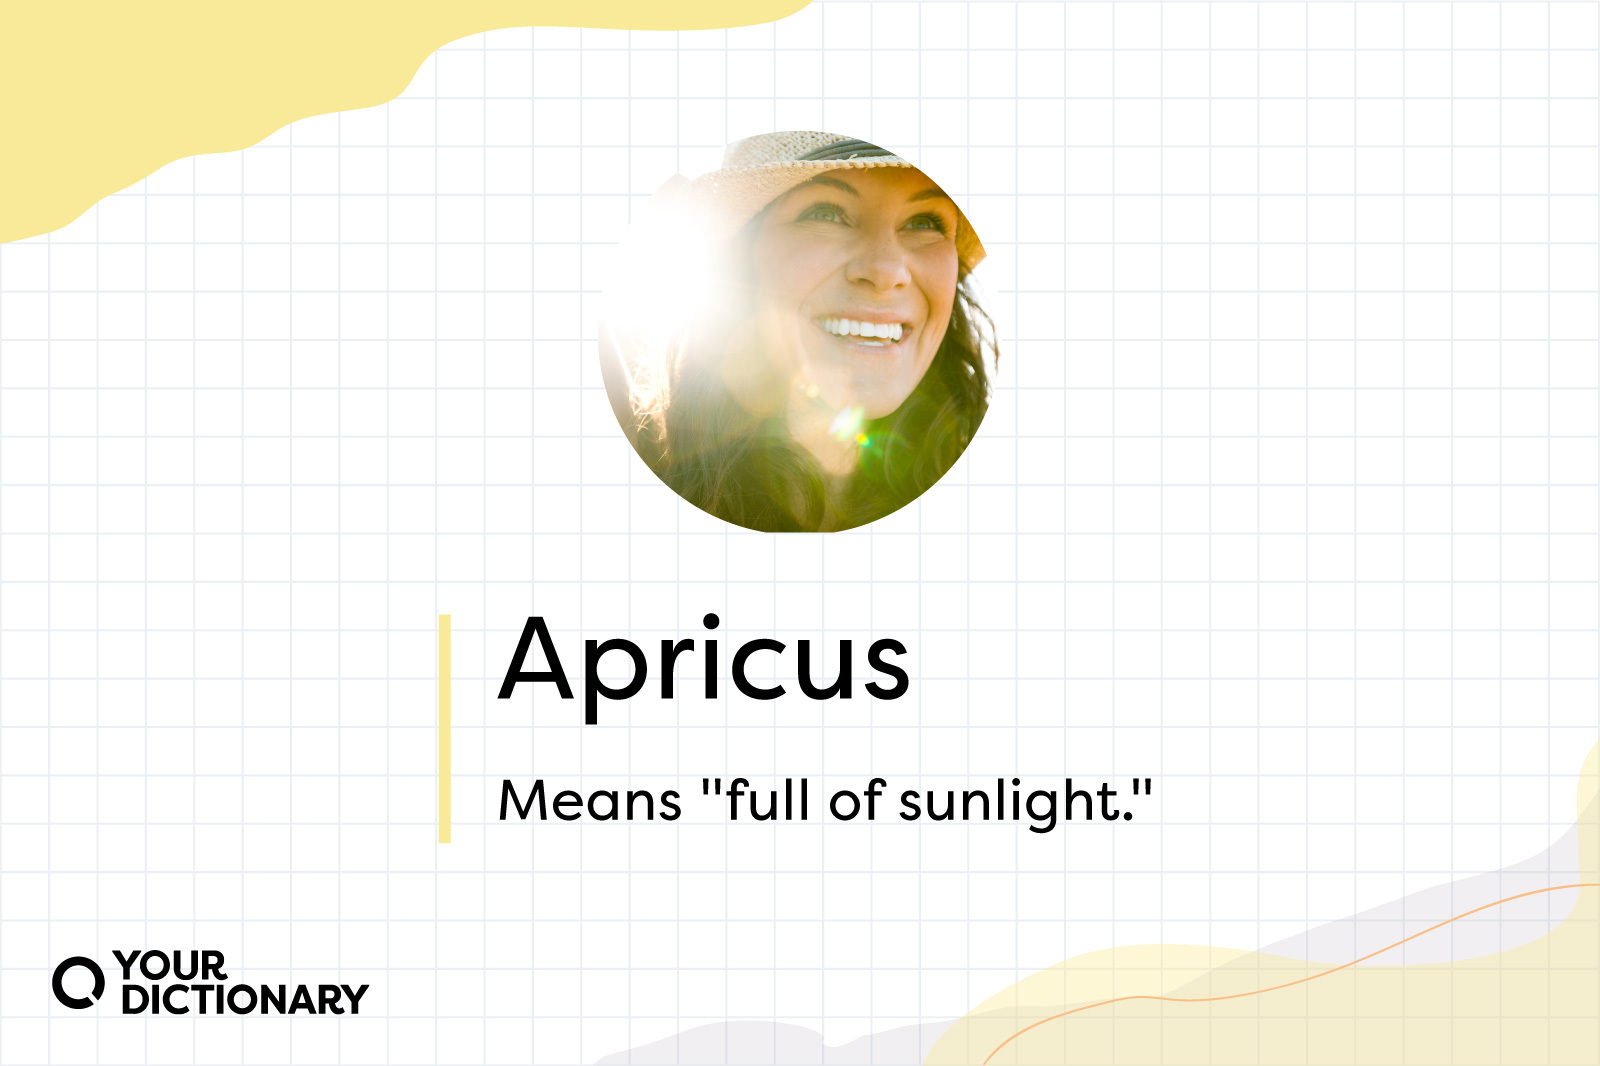 Woman and Sunlight With Latin Word "Apricus" and Meaning